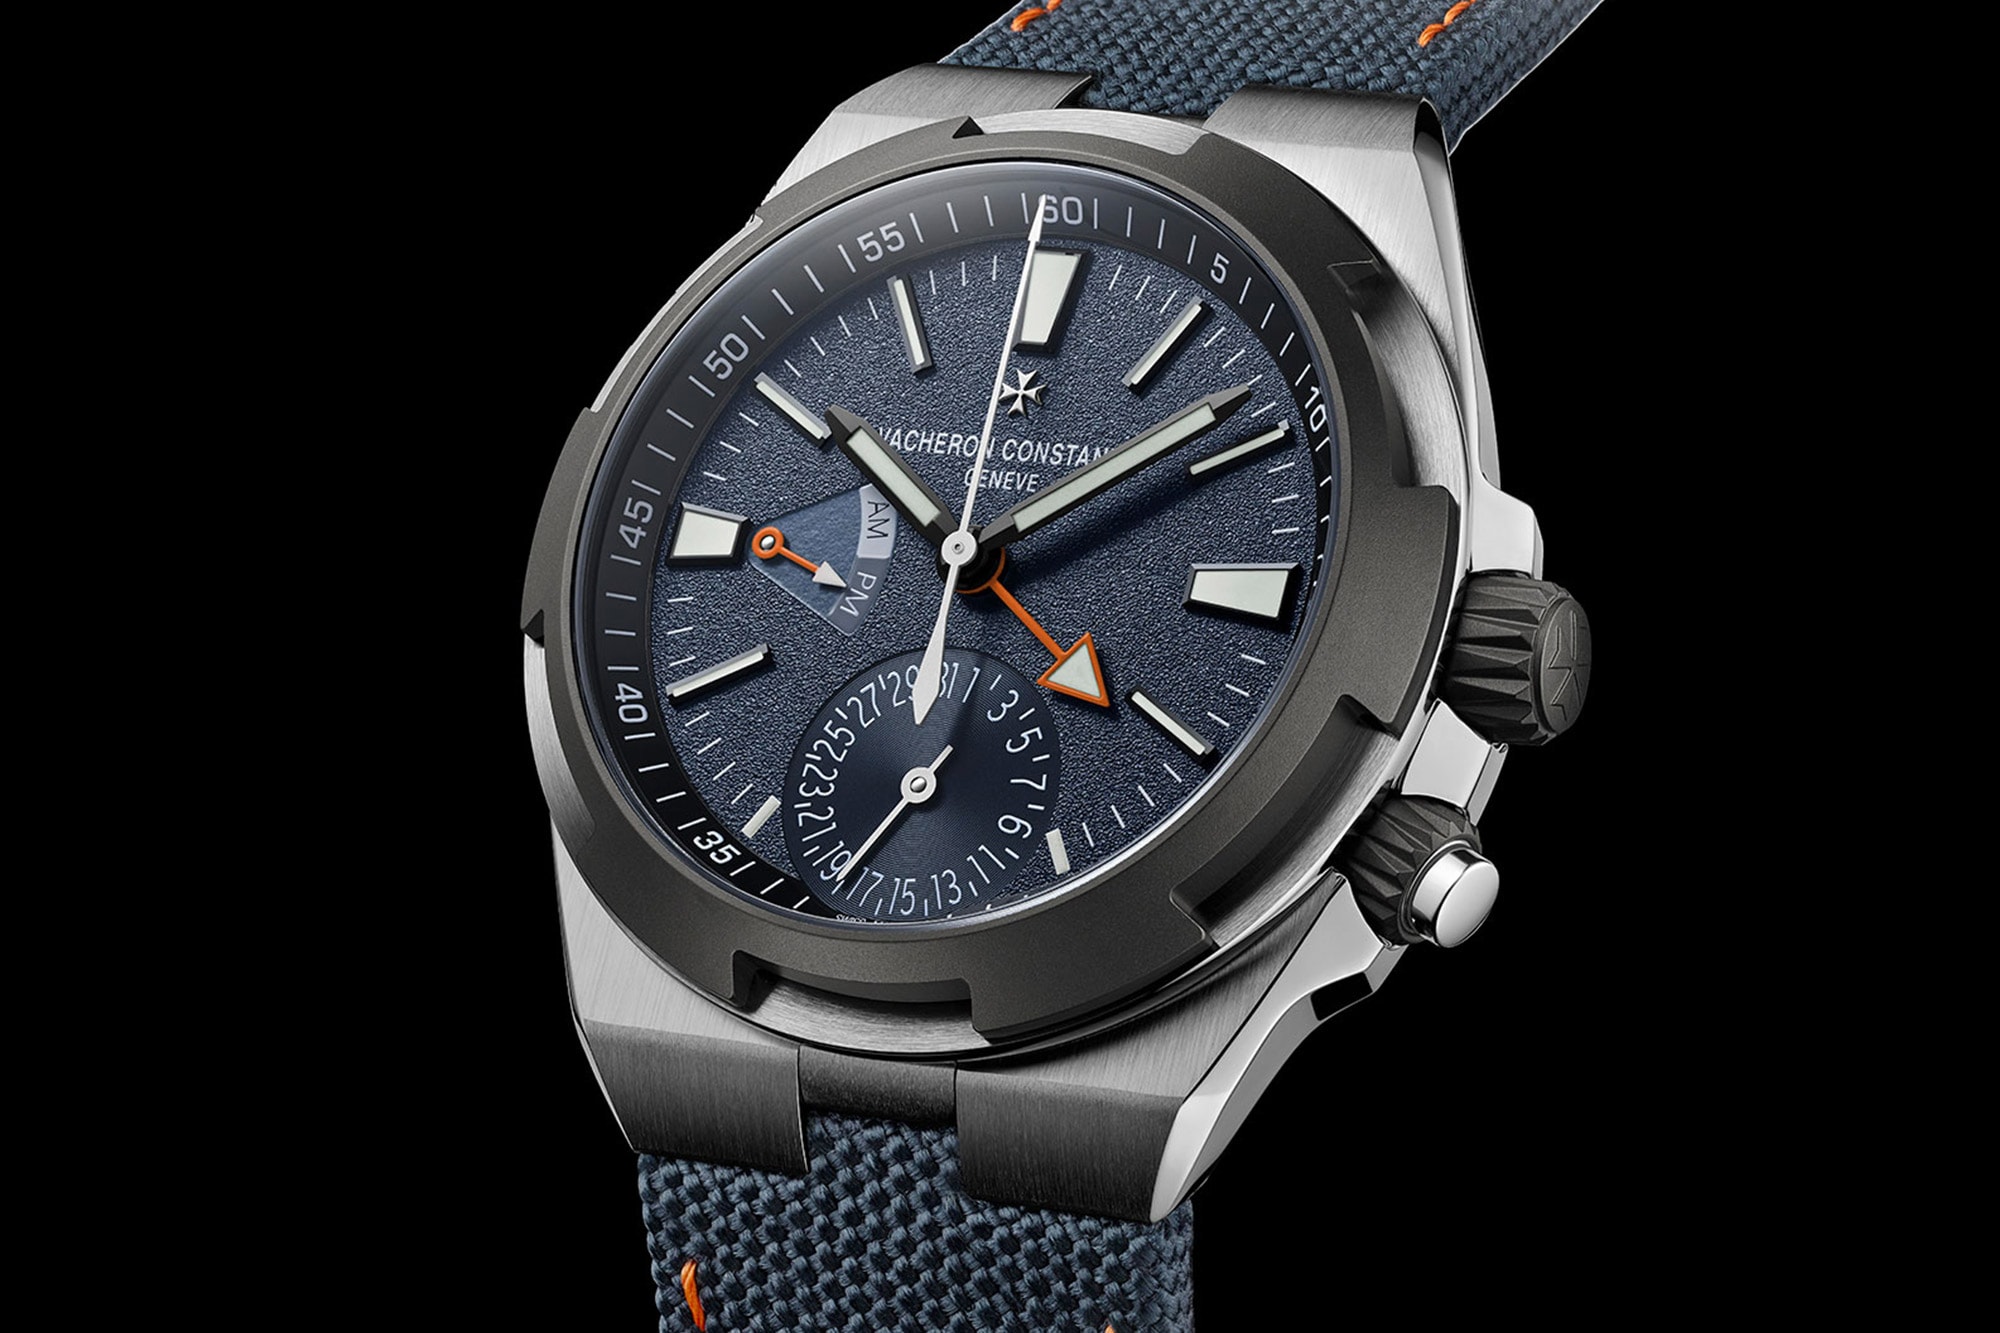 Vacheron Constantin Introduces Two New Limited Editions Inspired by an Everest Expedition